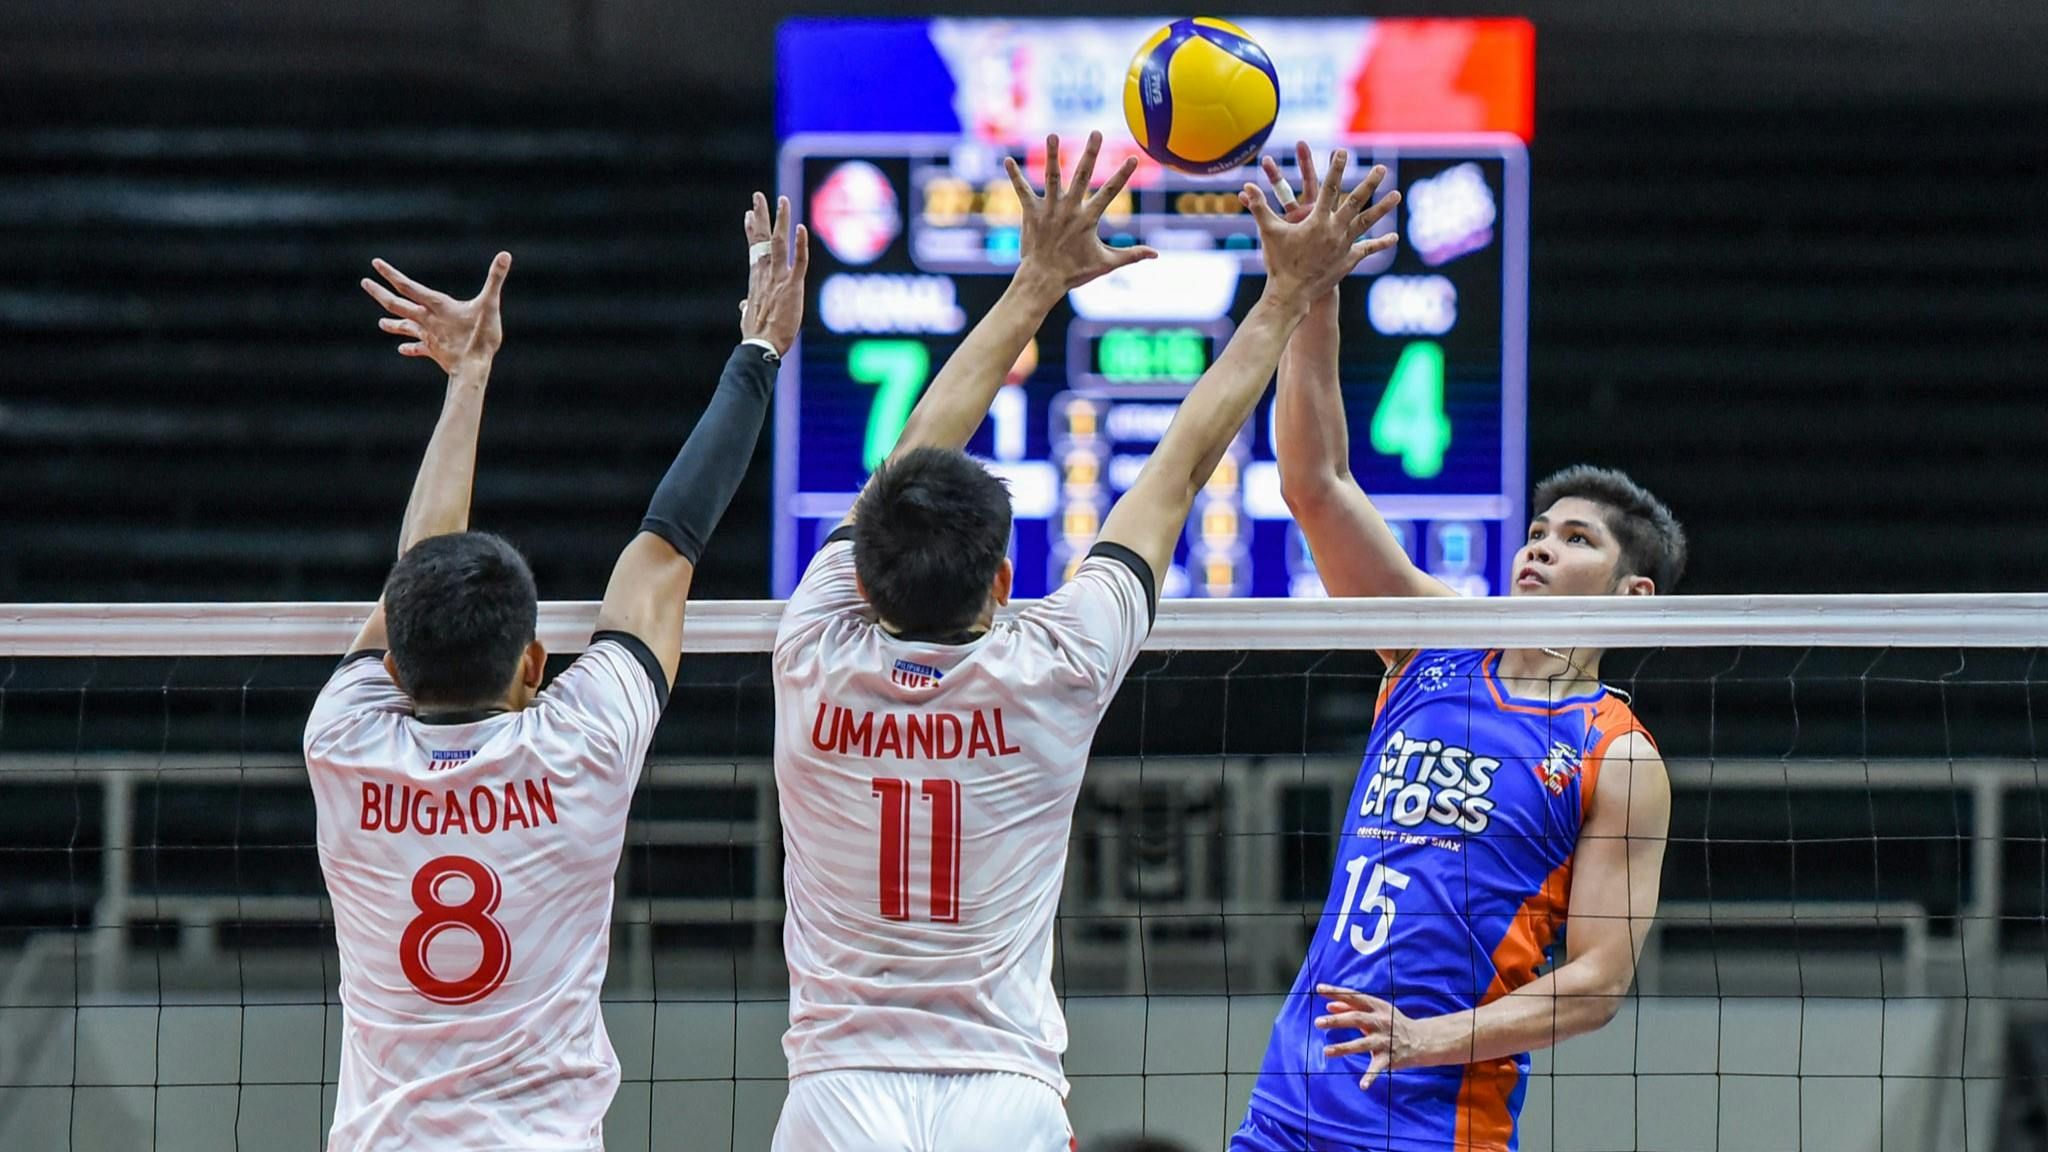 Spikers’ Turf: Marck Espejo concedes to Jau Umandal, Cignal’s relentless drive in Criss Cross